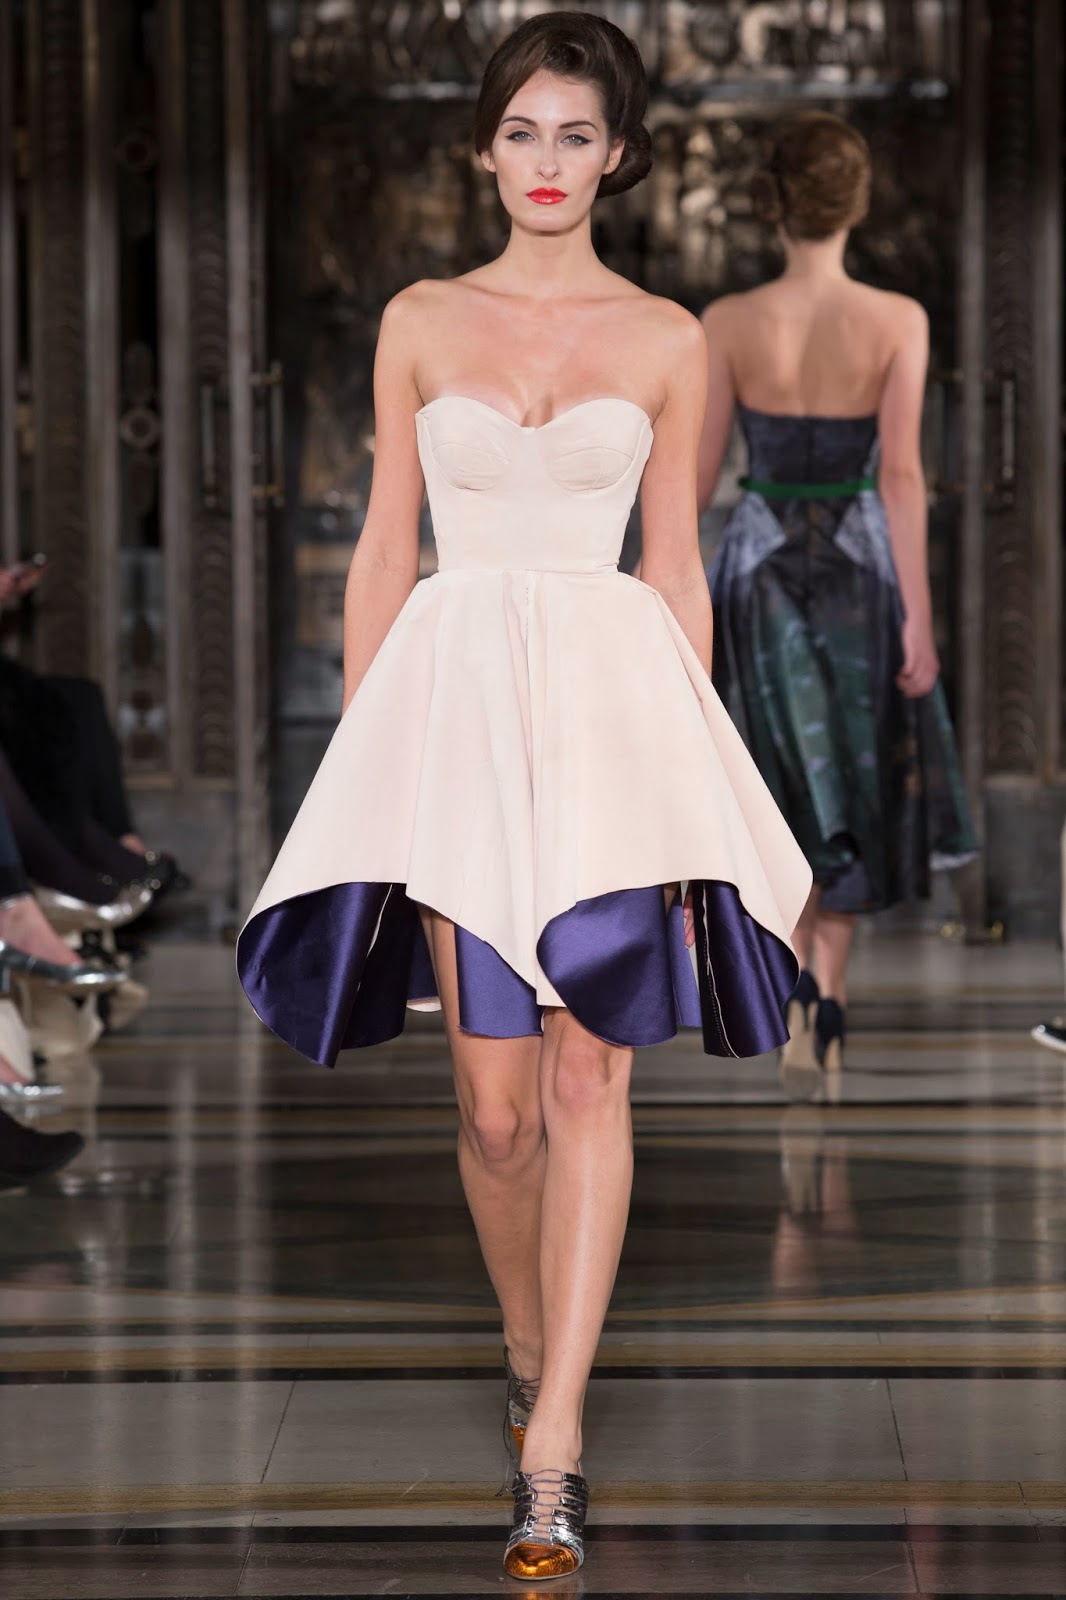 In true Ursula style, bustier dresses graced the catwalk. Full skirts ...